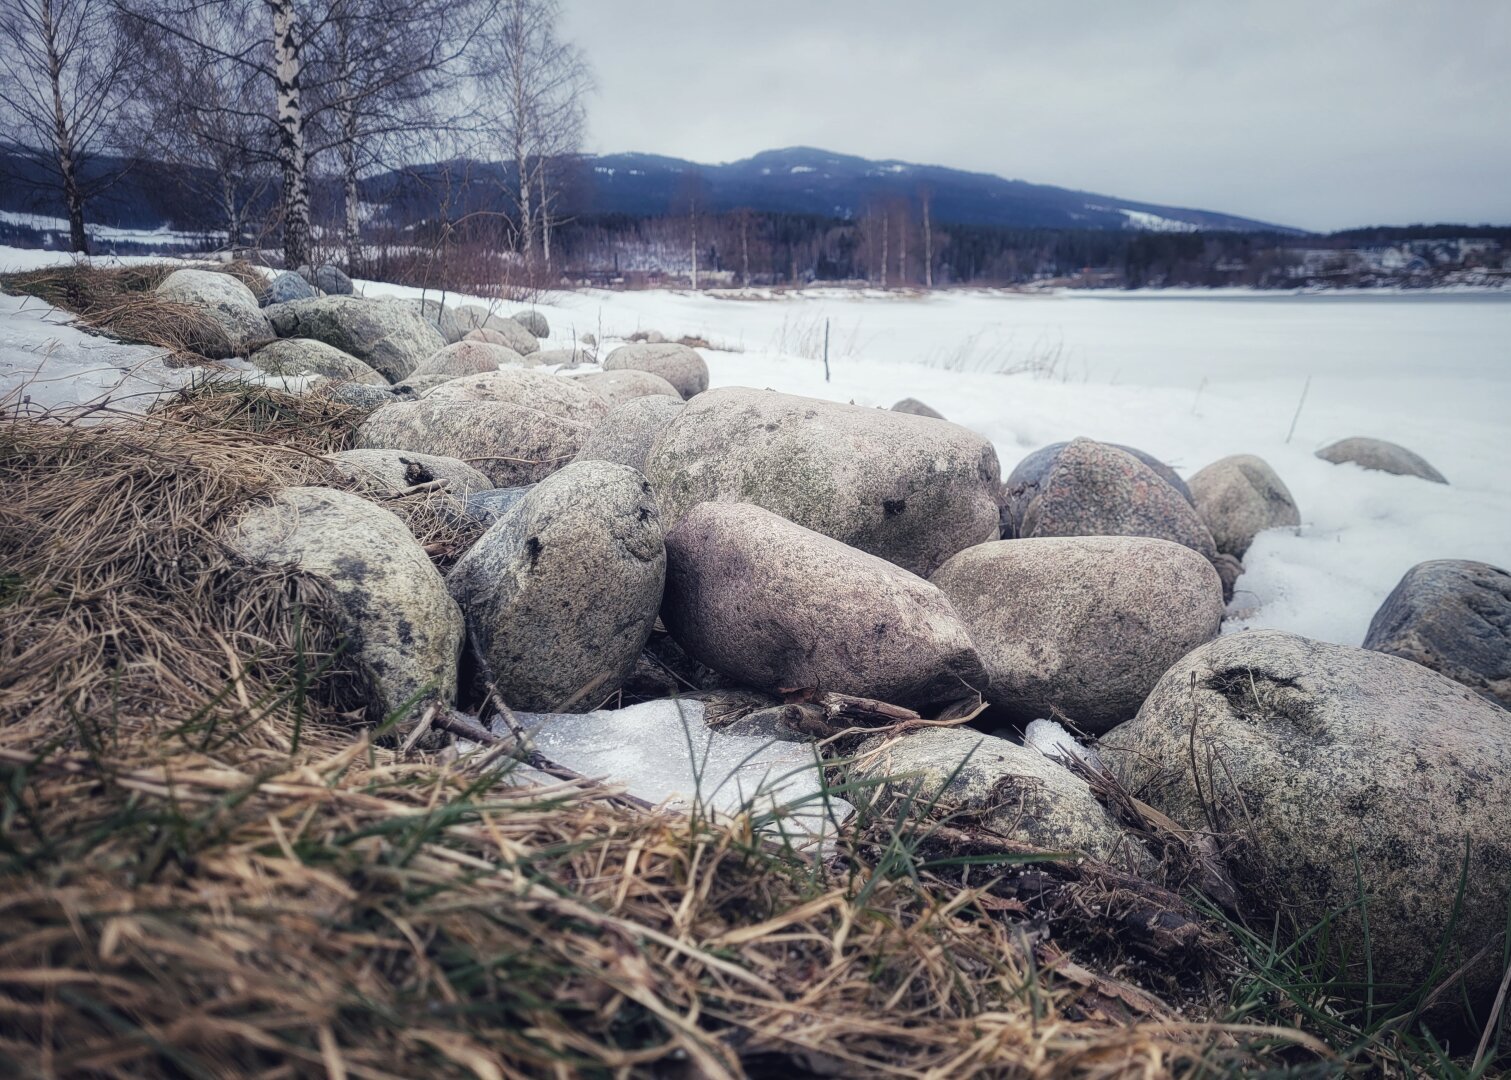 A shoreline of a frozen lake. The stones are free from snow and first green grass can be seen amongst the brown from last year. Rolling hills on the other side of the lake. The sky is grey.